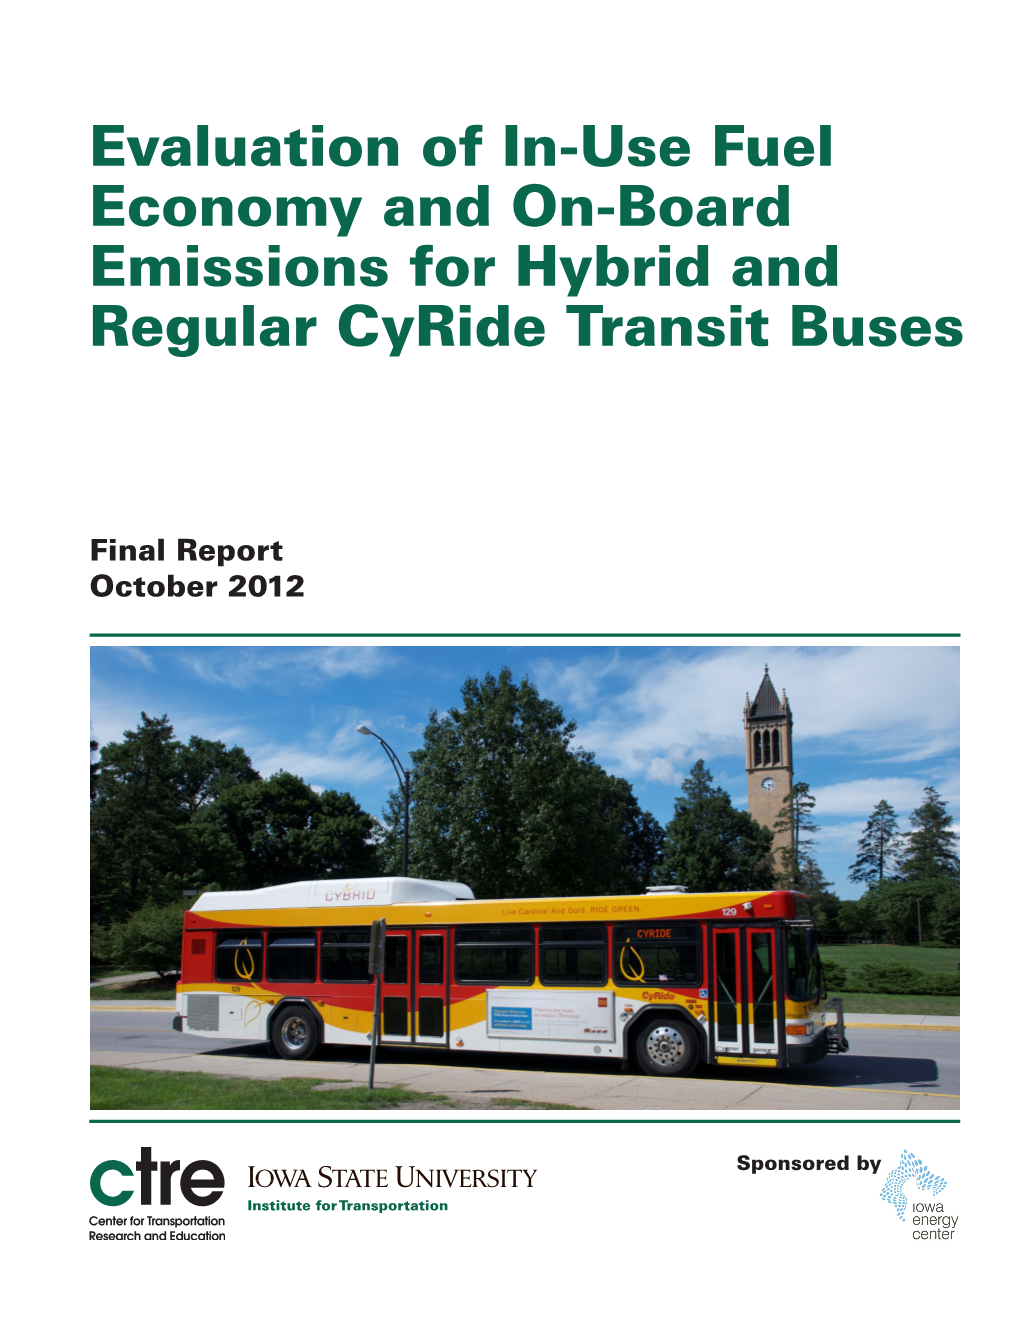 Evaluation of In-Use Fuel Economy and On-Board Emissions for Hybrid and Regular Cyride Transit Buses